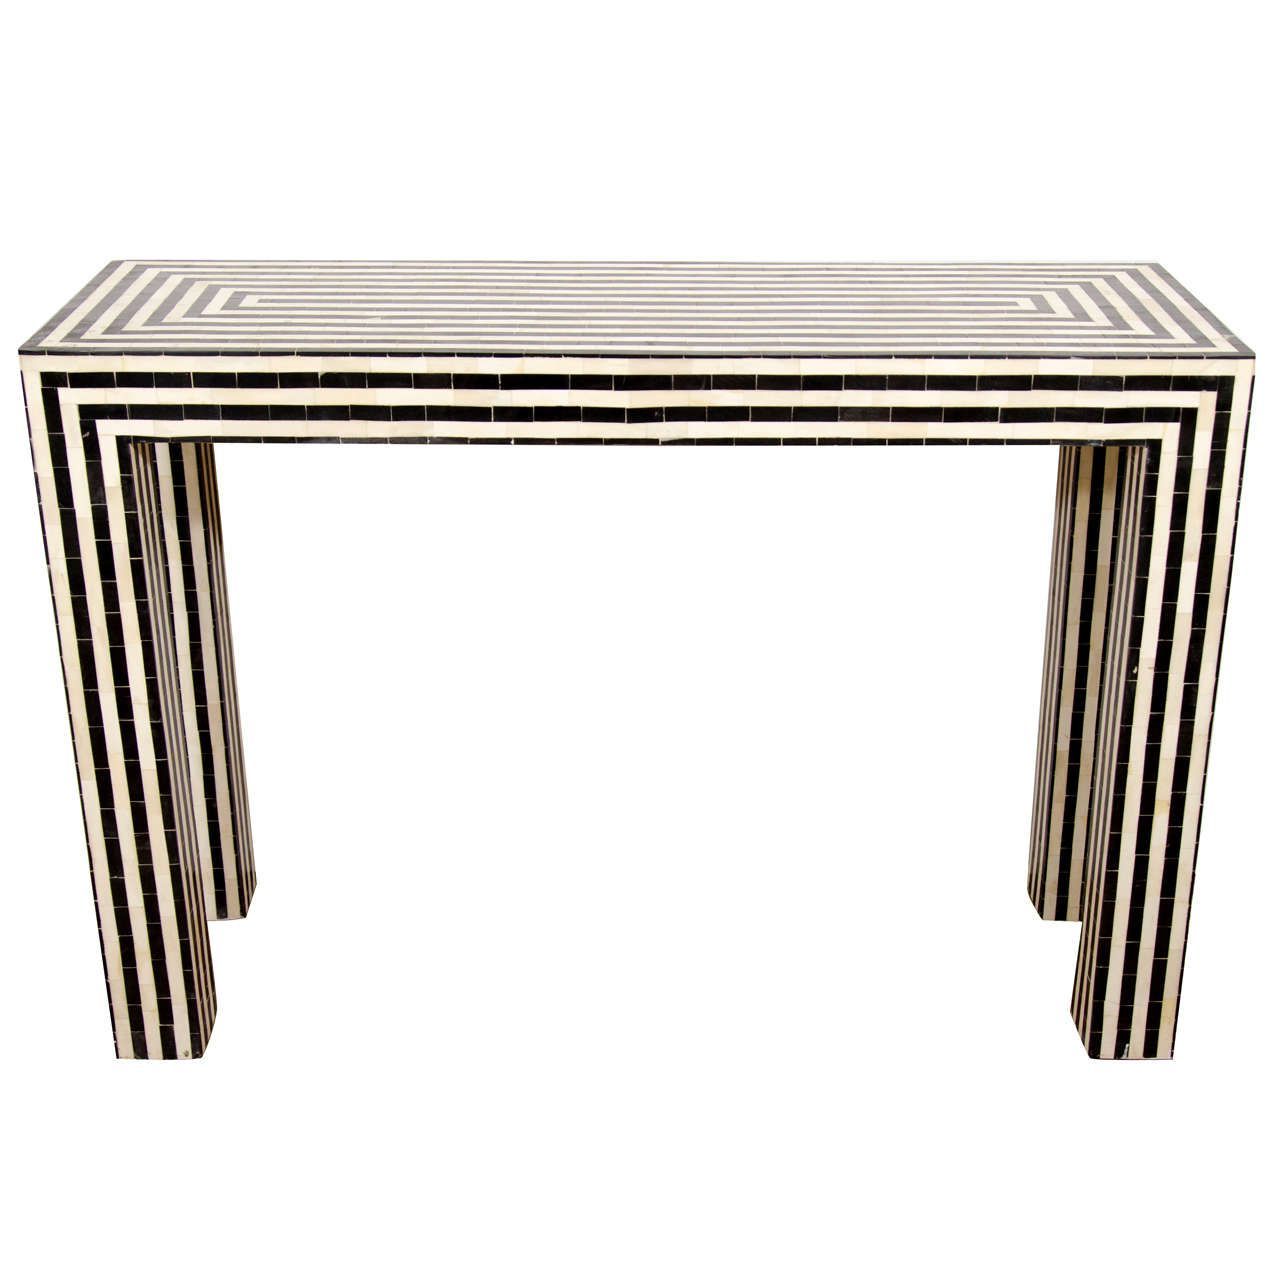 Indian Bone Inlay Black And White Striped Console | Home Decor Within Black And White Inlay Console Tables (Gallery 1 of 20)